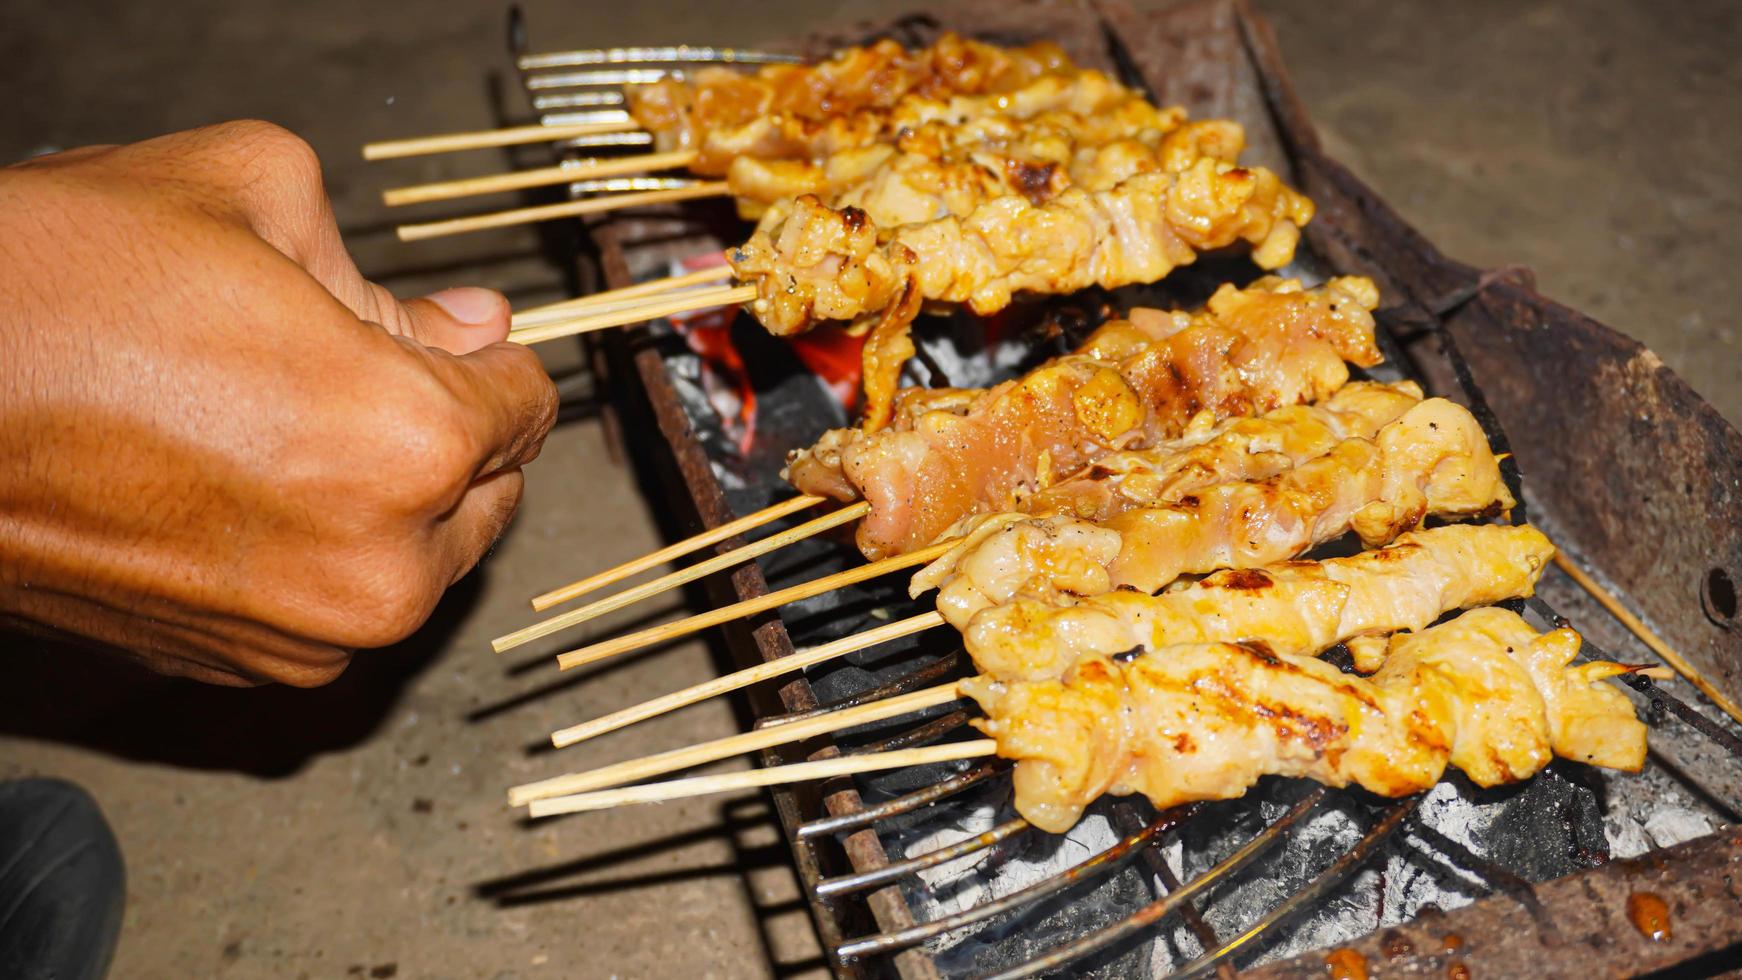 the process of making satay food, grilled over charcoal coals photo